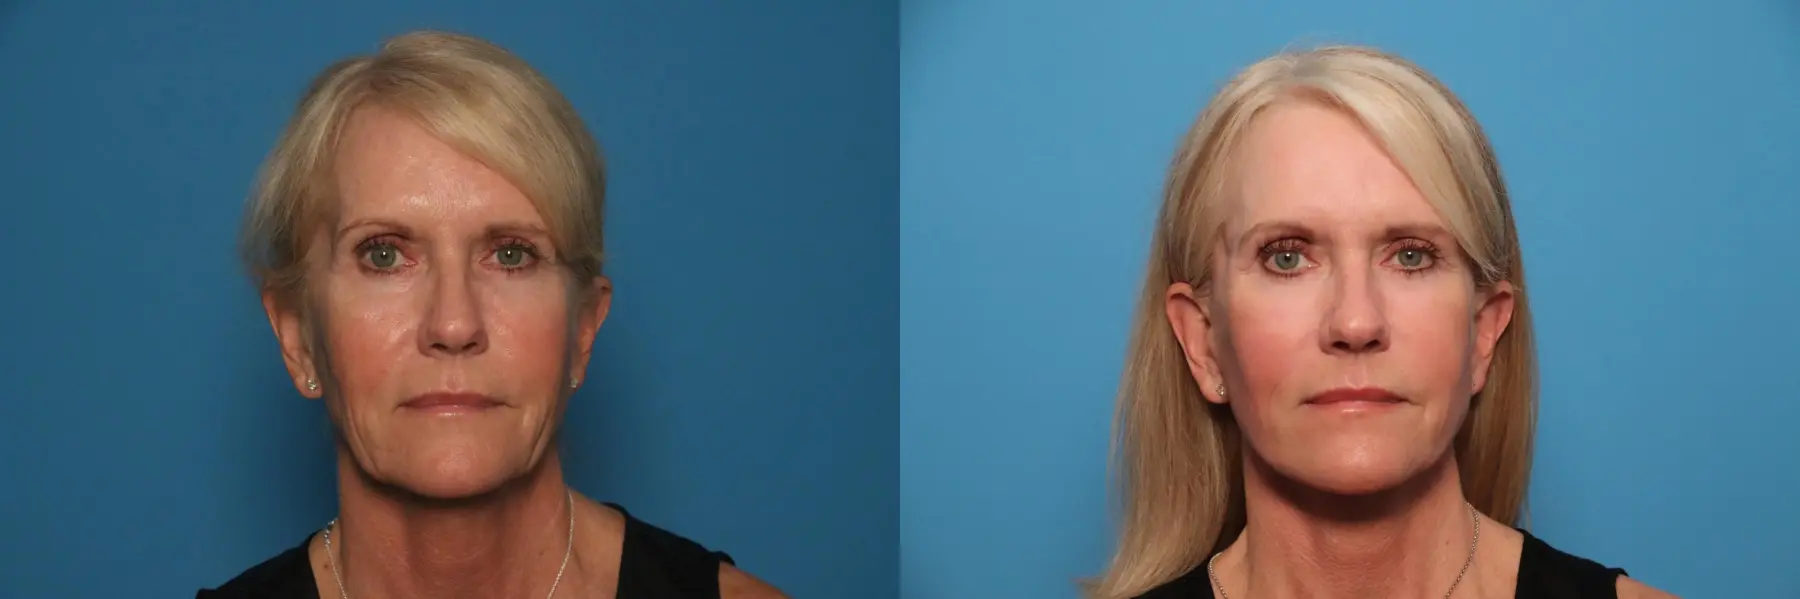 Mini Facelift: Patient 1 - Before and After 1